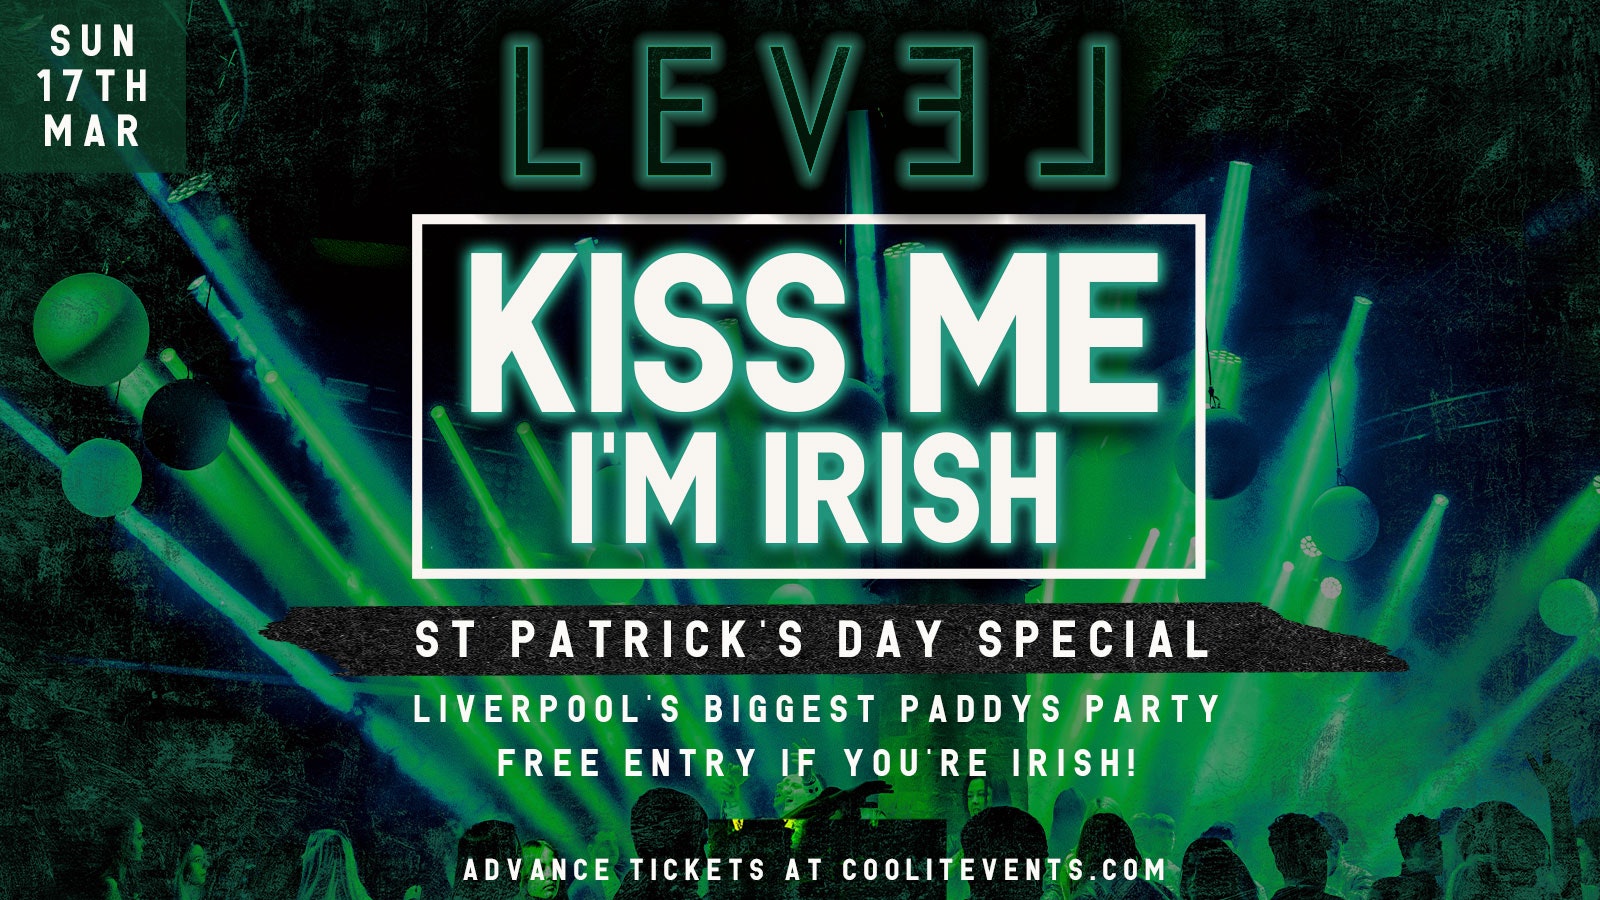 Kiss Me I’m Irish – Paddy’s Day Special! FREE ENTRY if you’re Irish